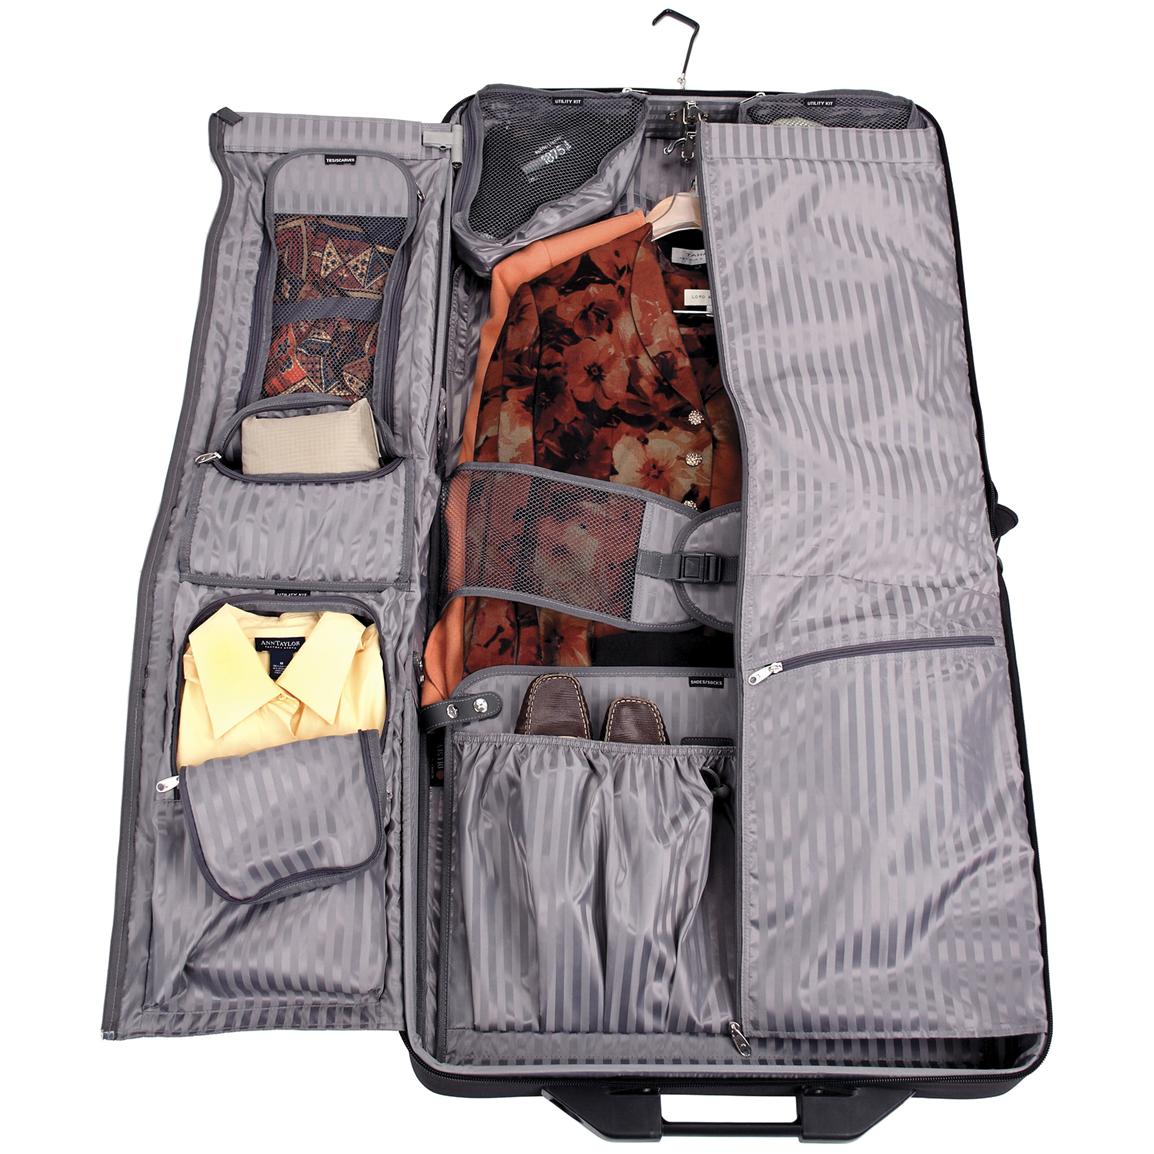 Delsey® Helium Pro Rolling Garment Bag - 142543, at Sportsman's Guide